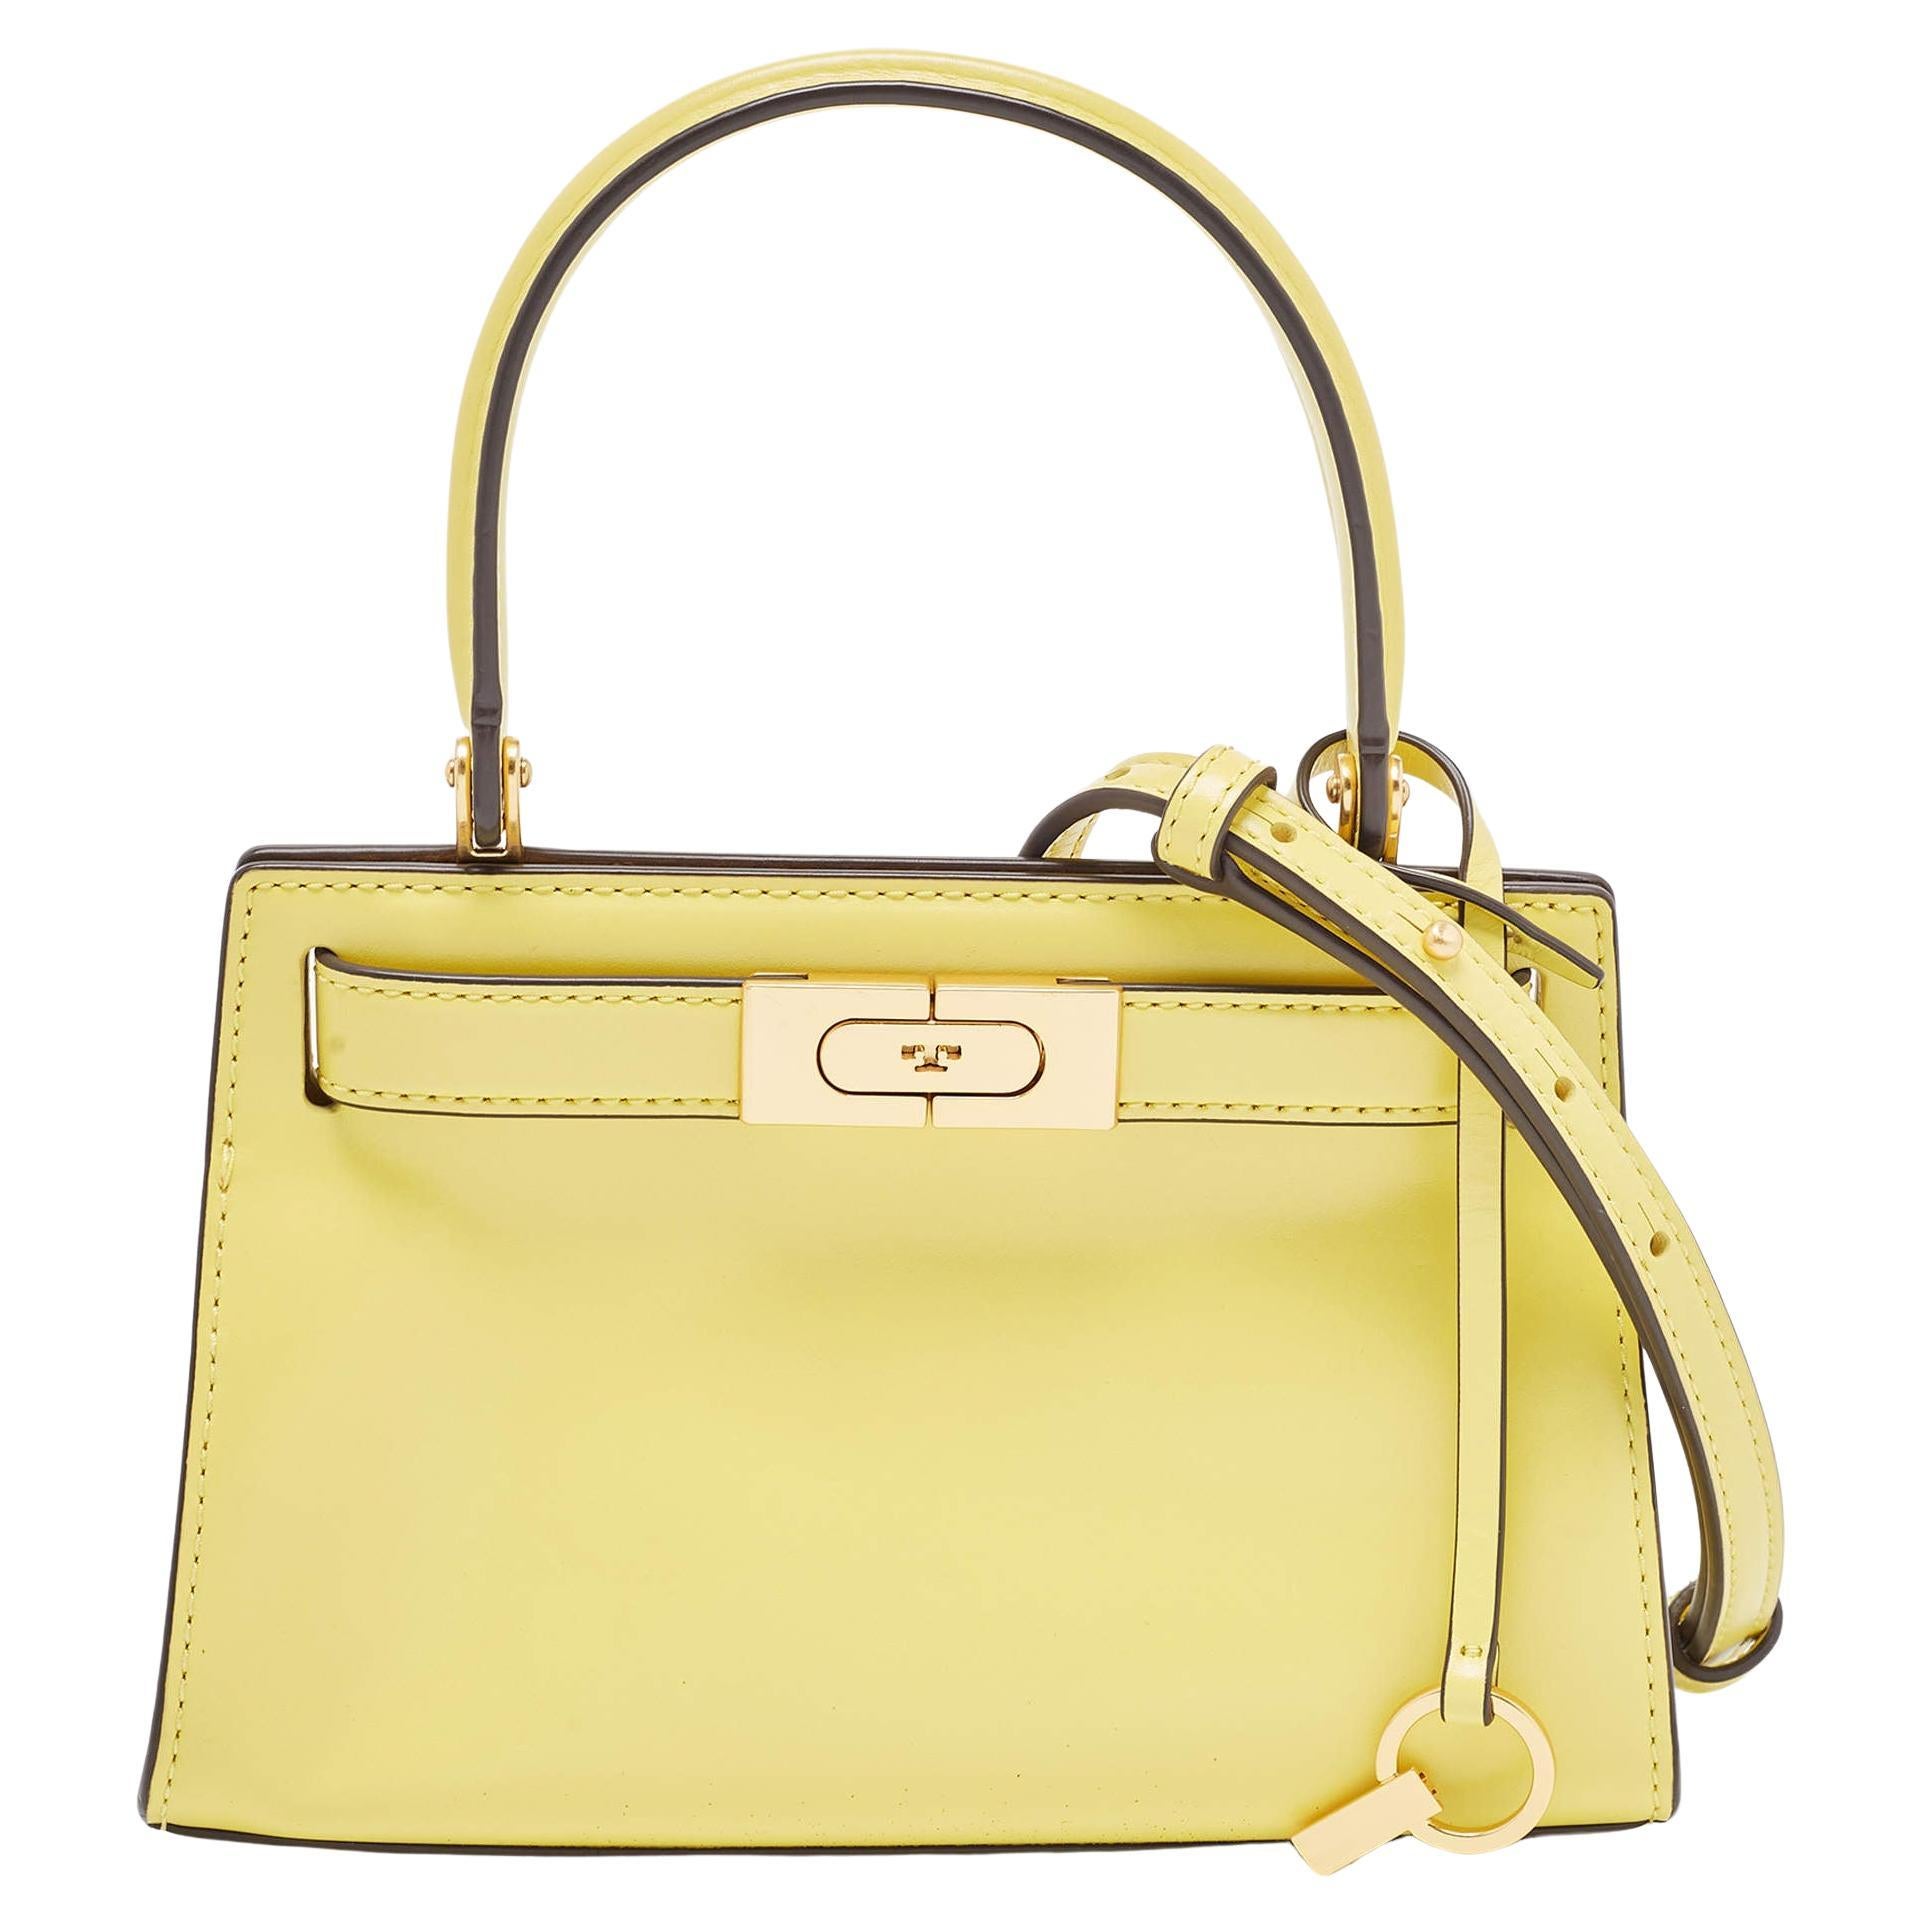 Tory Burch Yellow Leather Petite Lee Radziwill Top Handle Bag